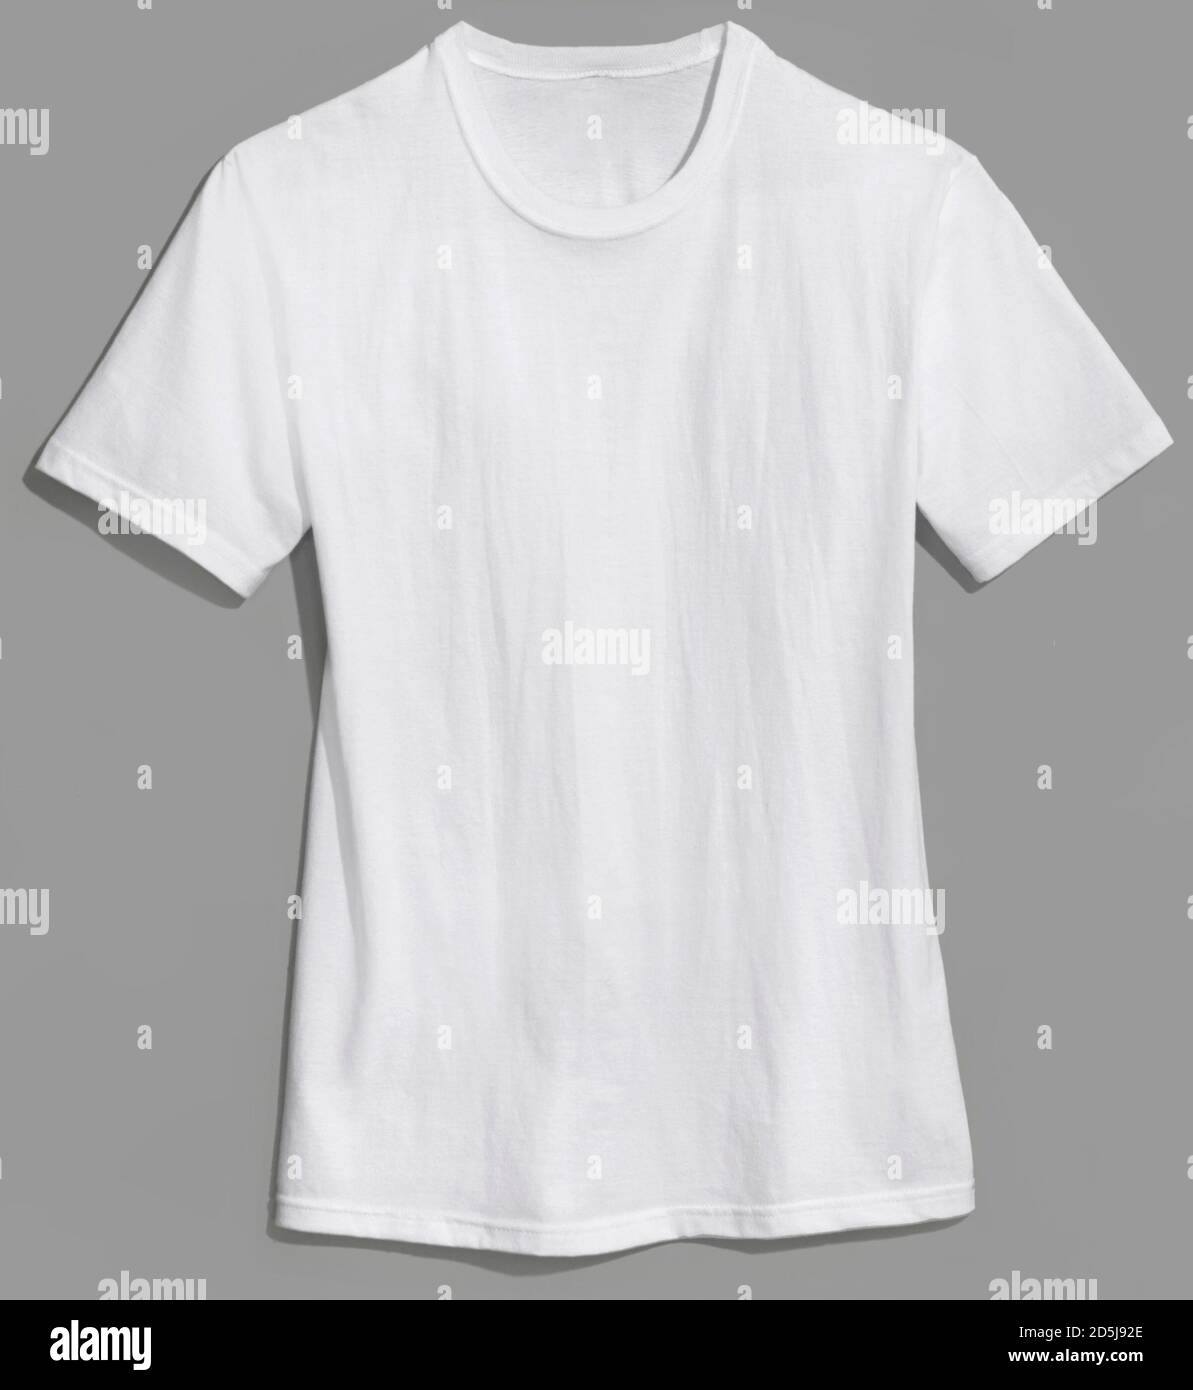 hanes plain white t-shirt photographed on a grey background Stock Photo